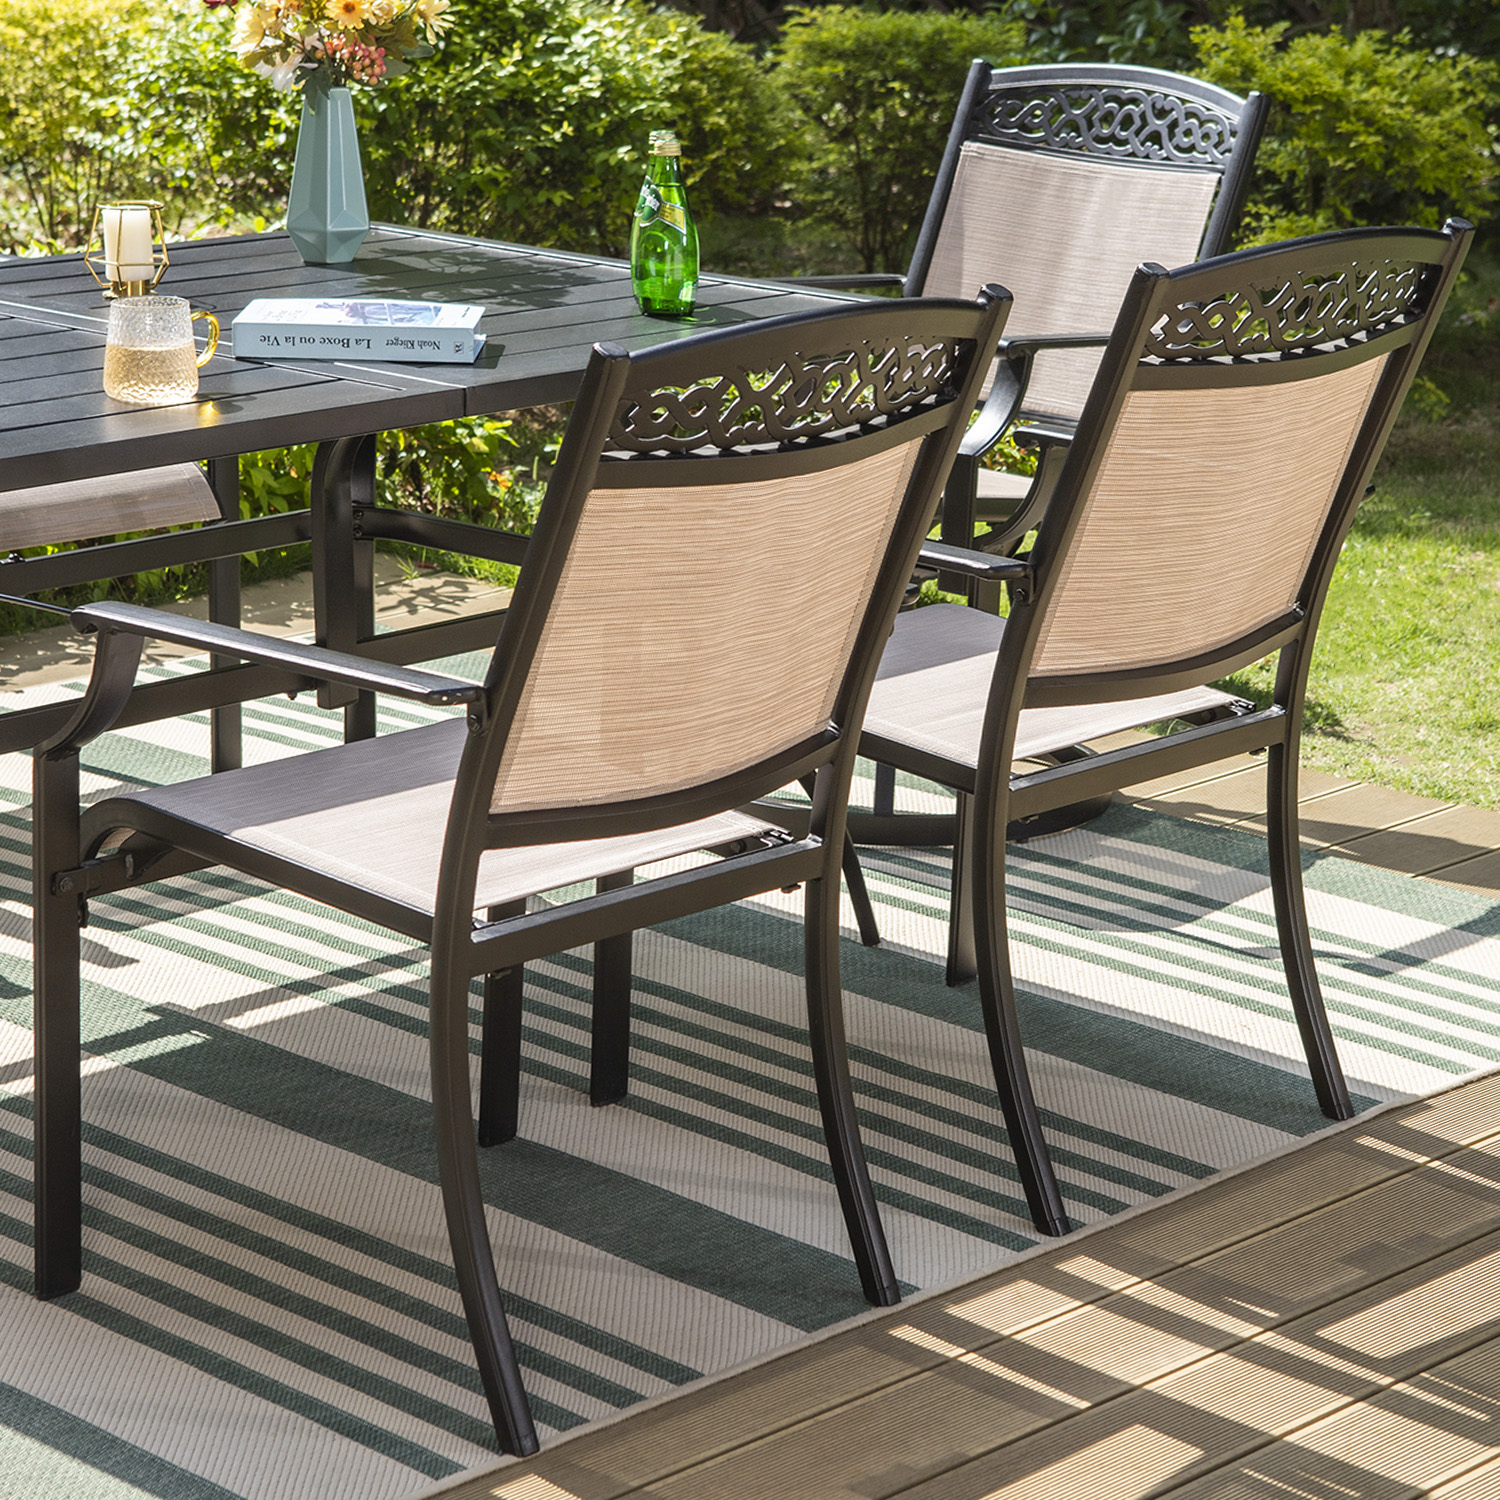 MF Studio 7 Pieces Cast Aluminum Outdoor Patio Dining Set Metal Furniture Set with Rectangle Table and Textilene Chairs for 6 Person, Black&Beige - image 4 of 17